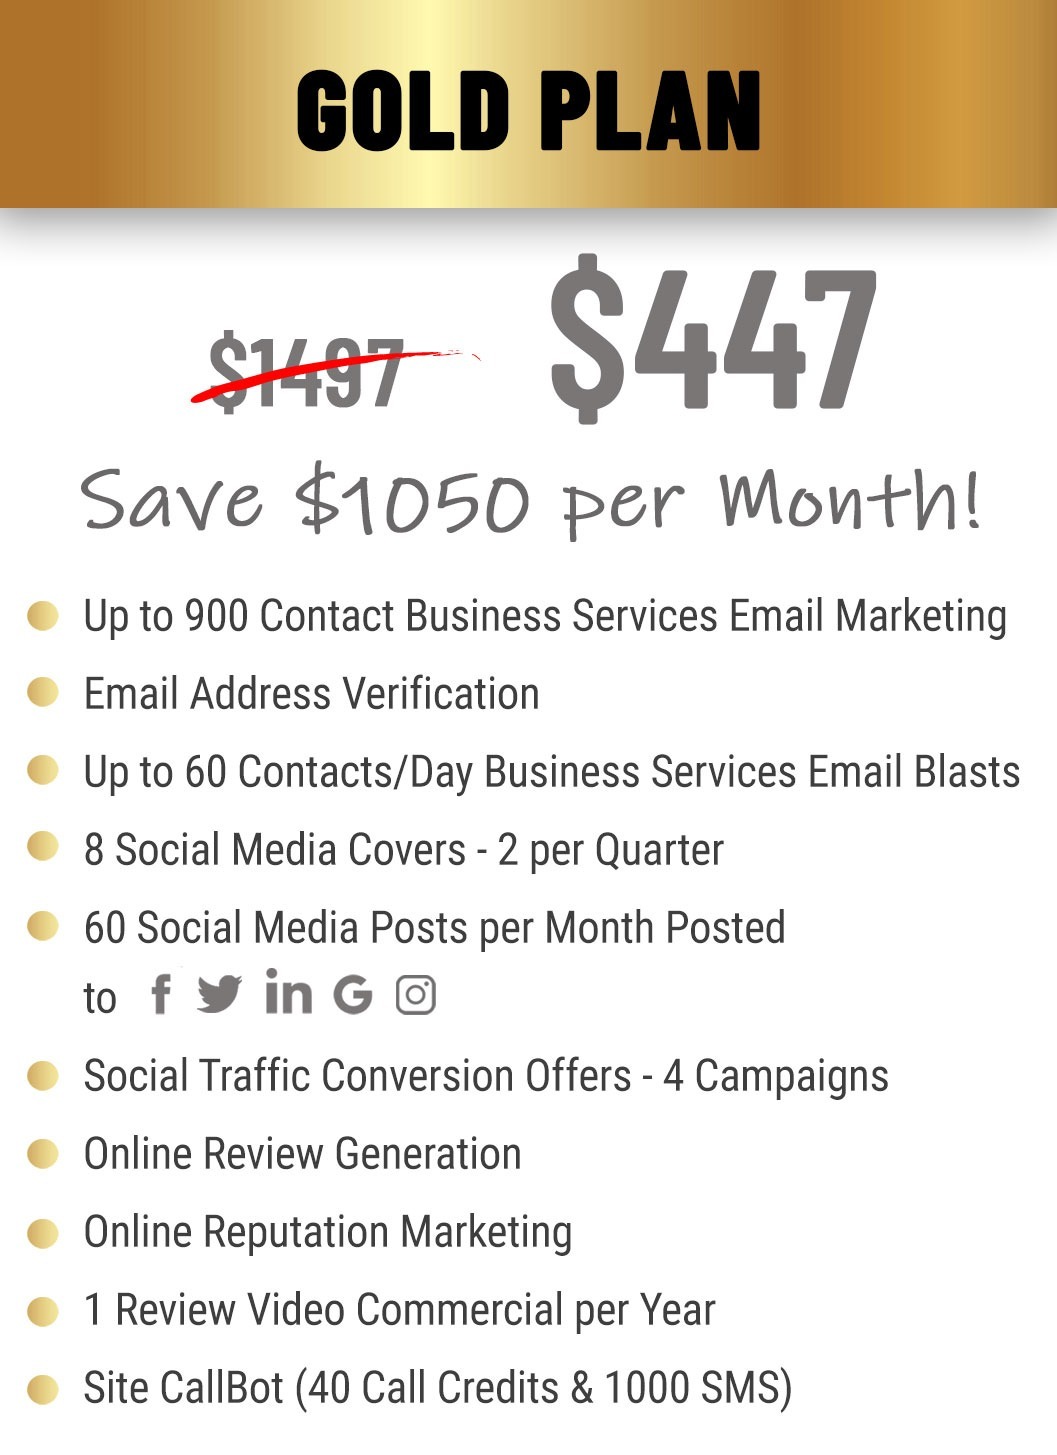 gold plan $447 per month pricing and features for business services.